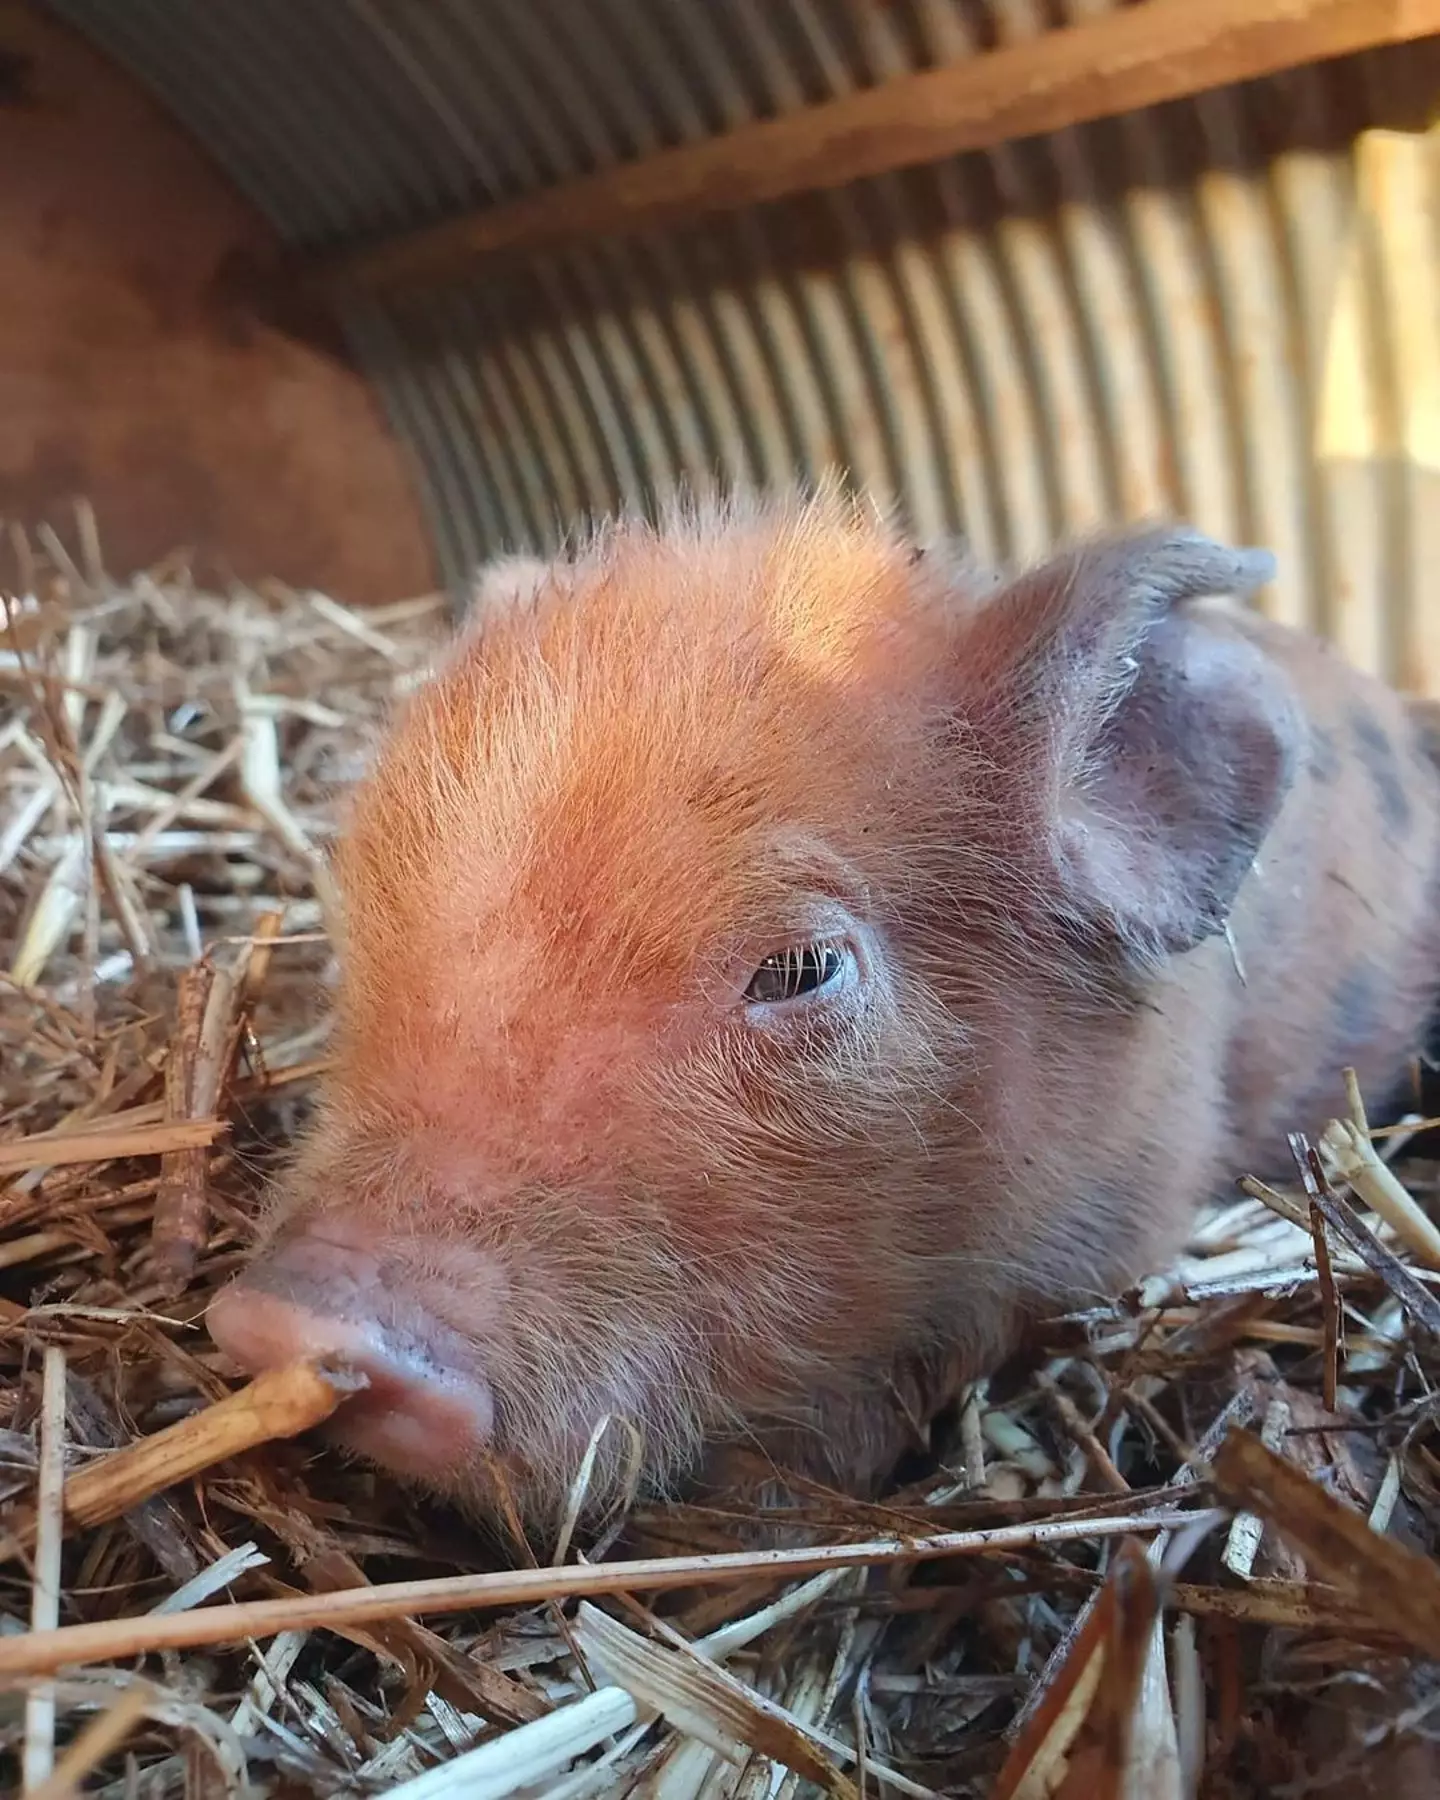 The adorable piglet has sadly passed away.